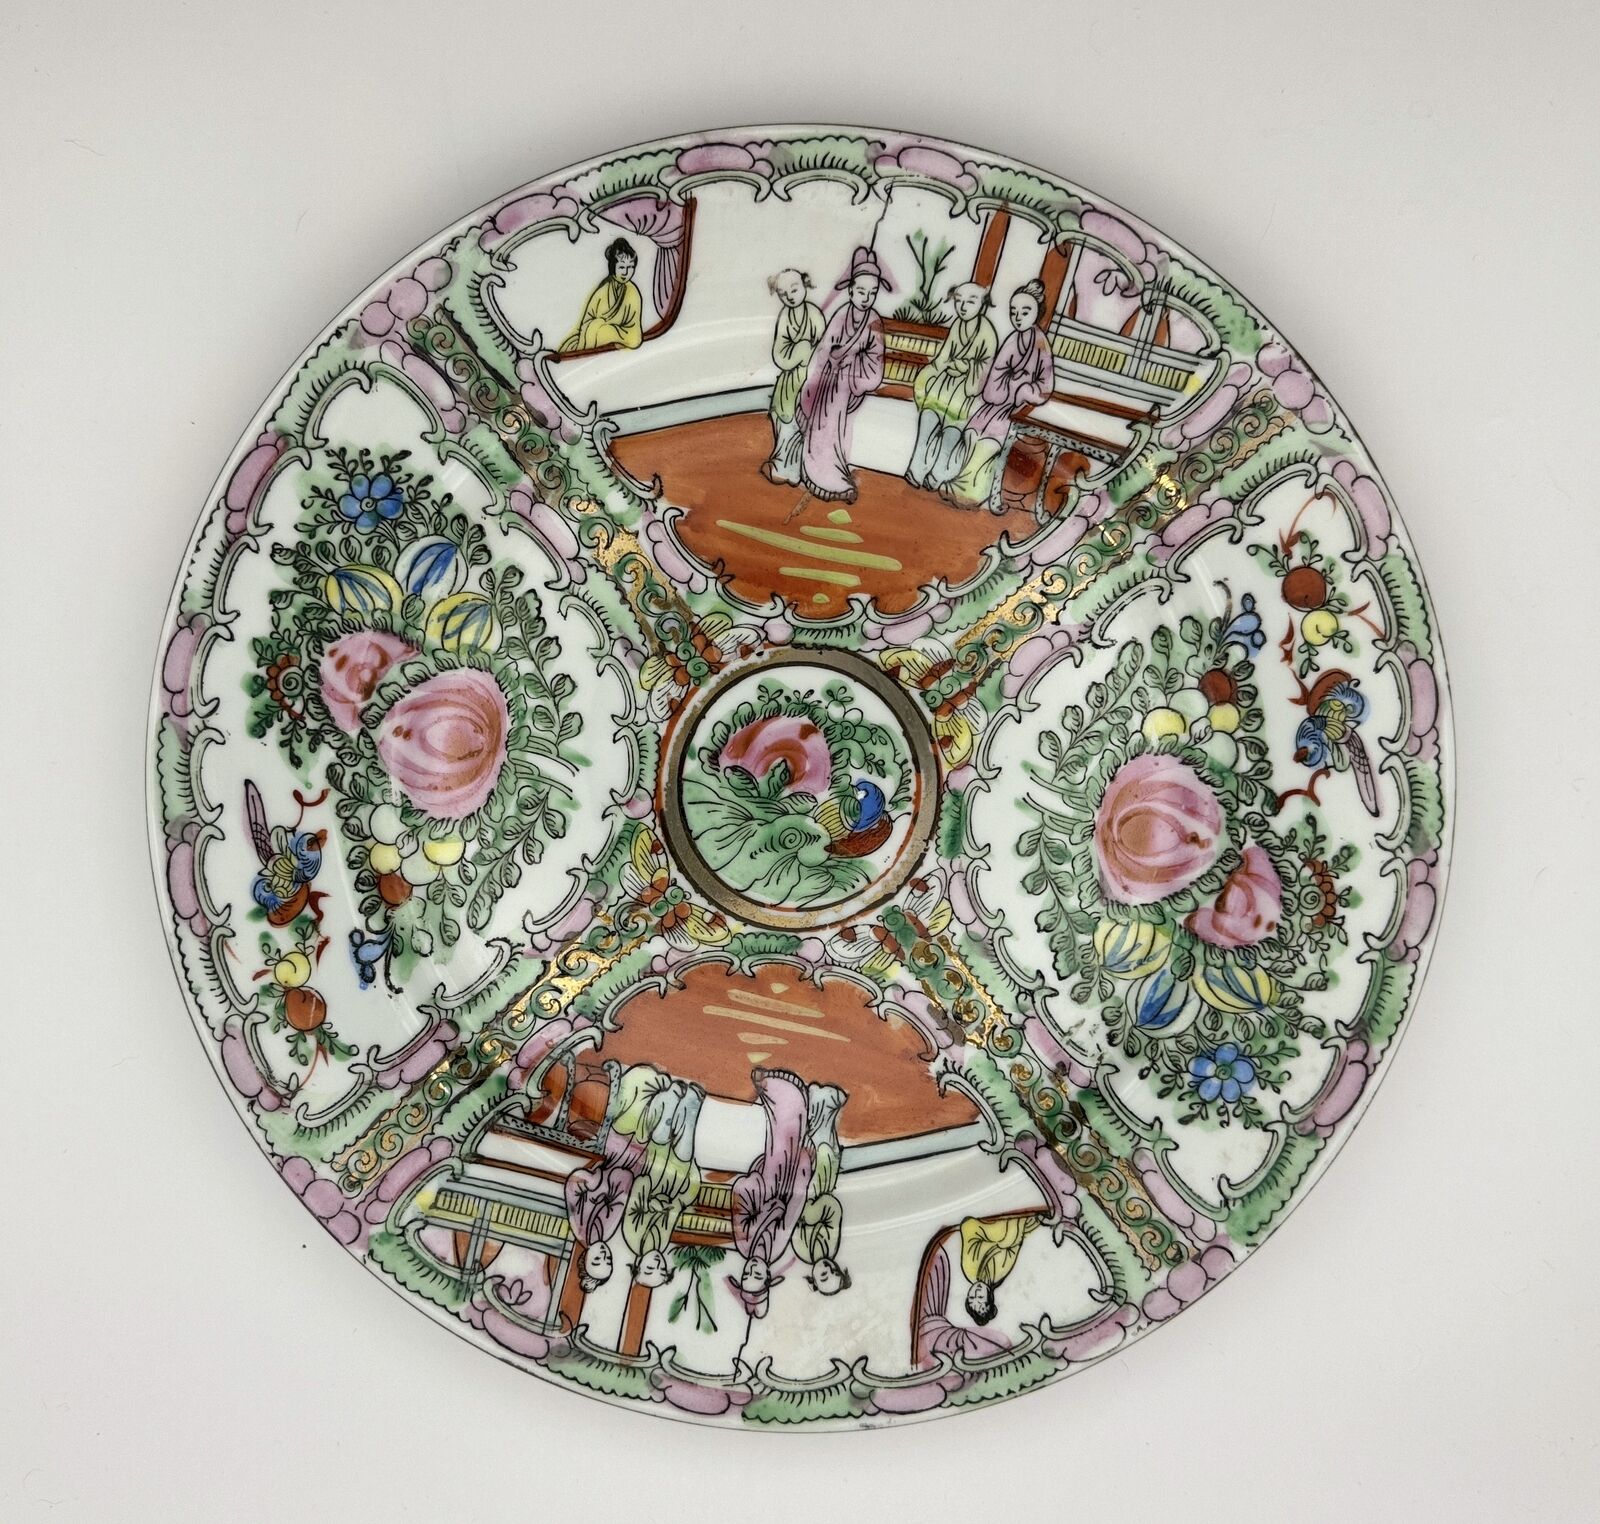 Vintage Hand-Painted Decorative Plate - Made in Macao